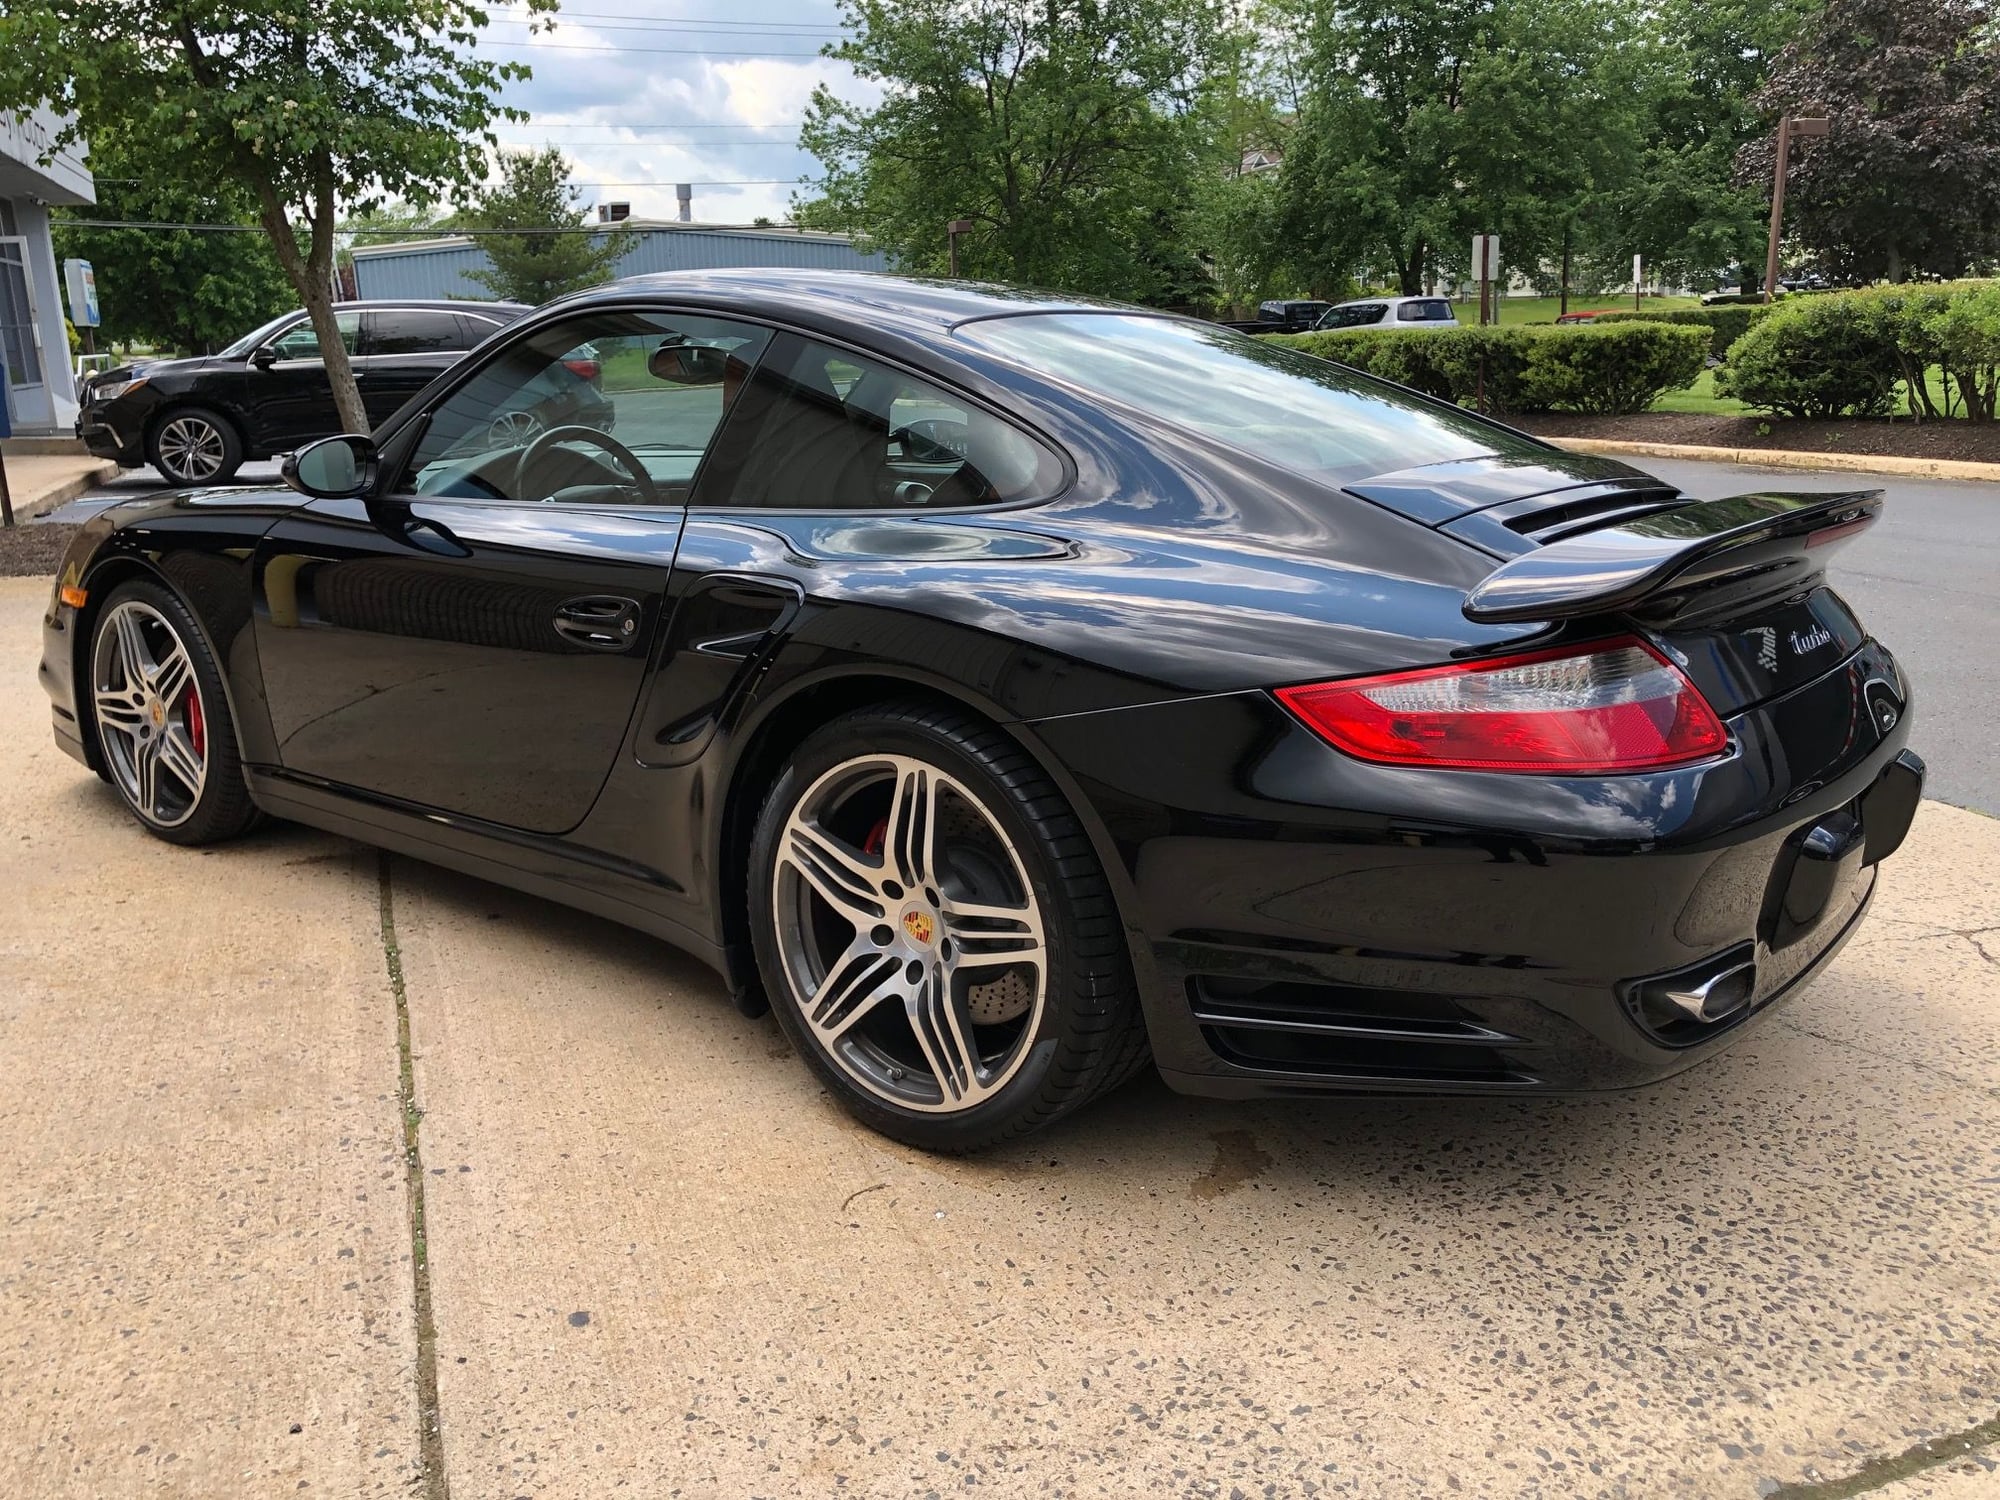 2008 Porsche 911 - 2008 911 Turbo, 997 Turbo, 20K MILES, 1 OWNER - Used - VIN WP0AD29908S783746 - 20,423 Miles - 6 cyl - AWD - Manual - Coupe - Black - Ocean, NJ 07712, United States